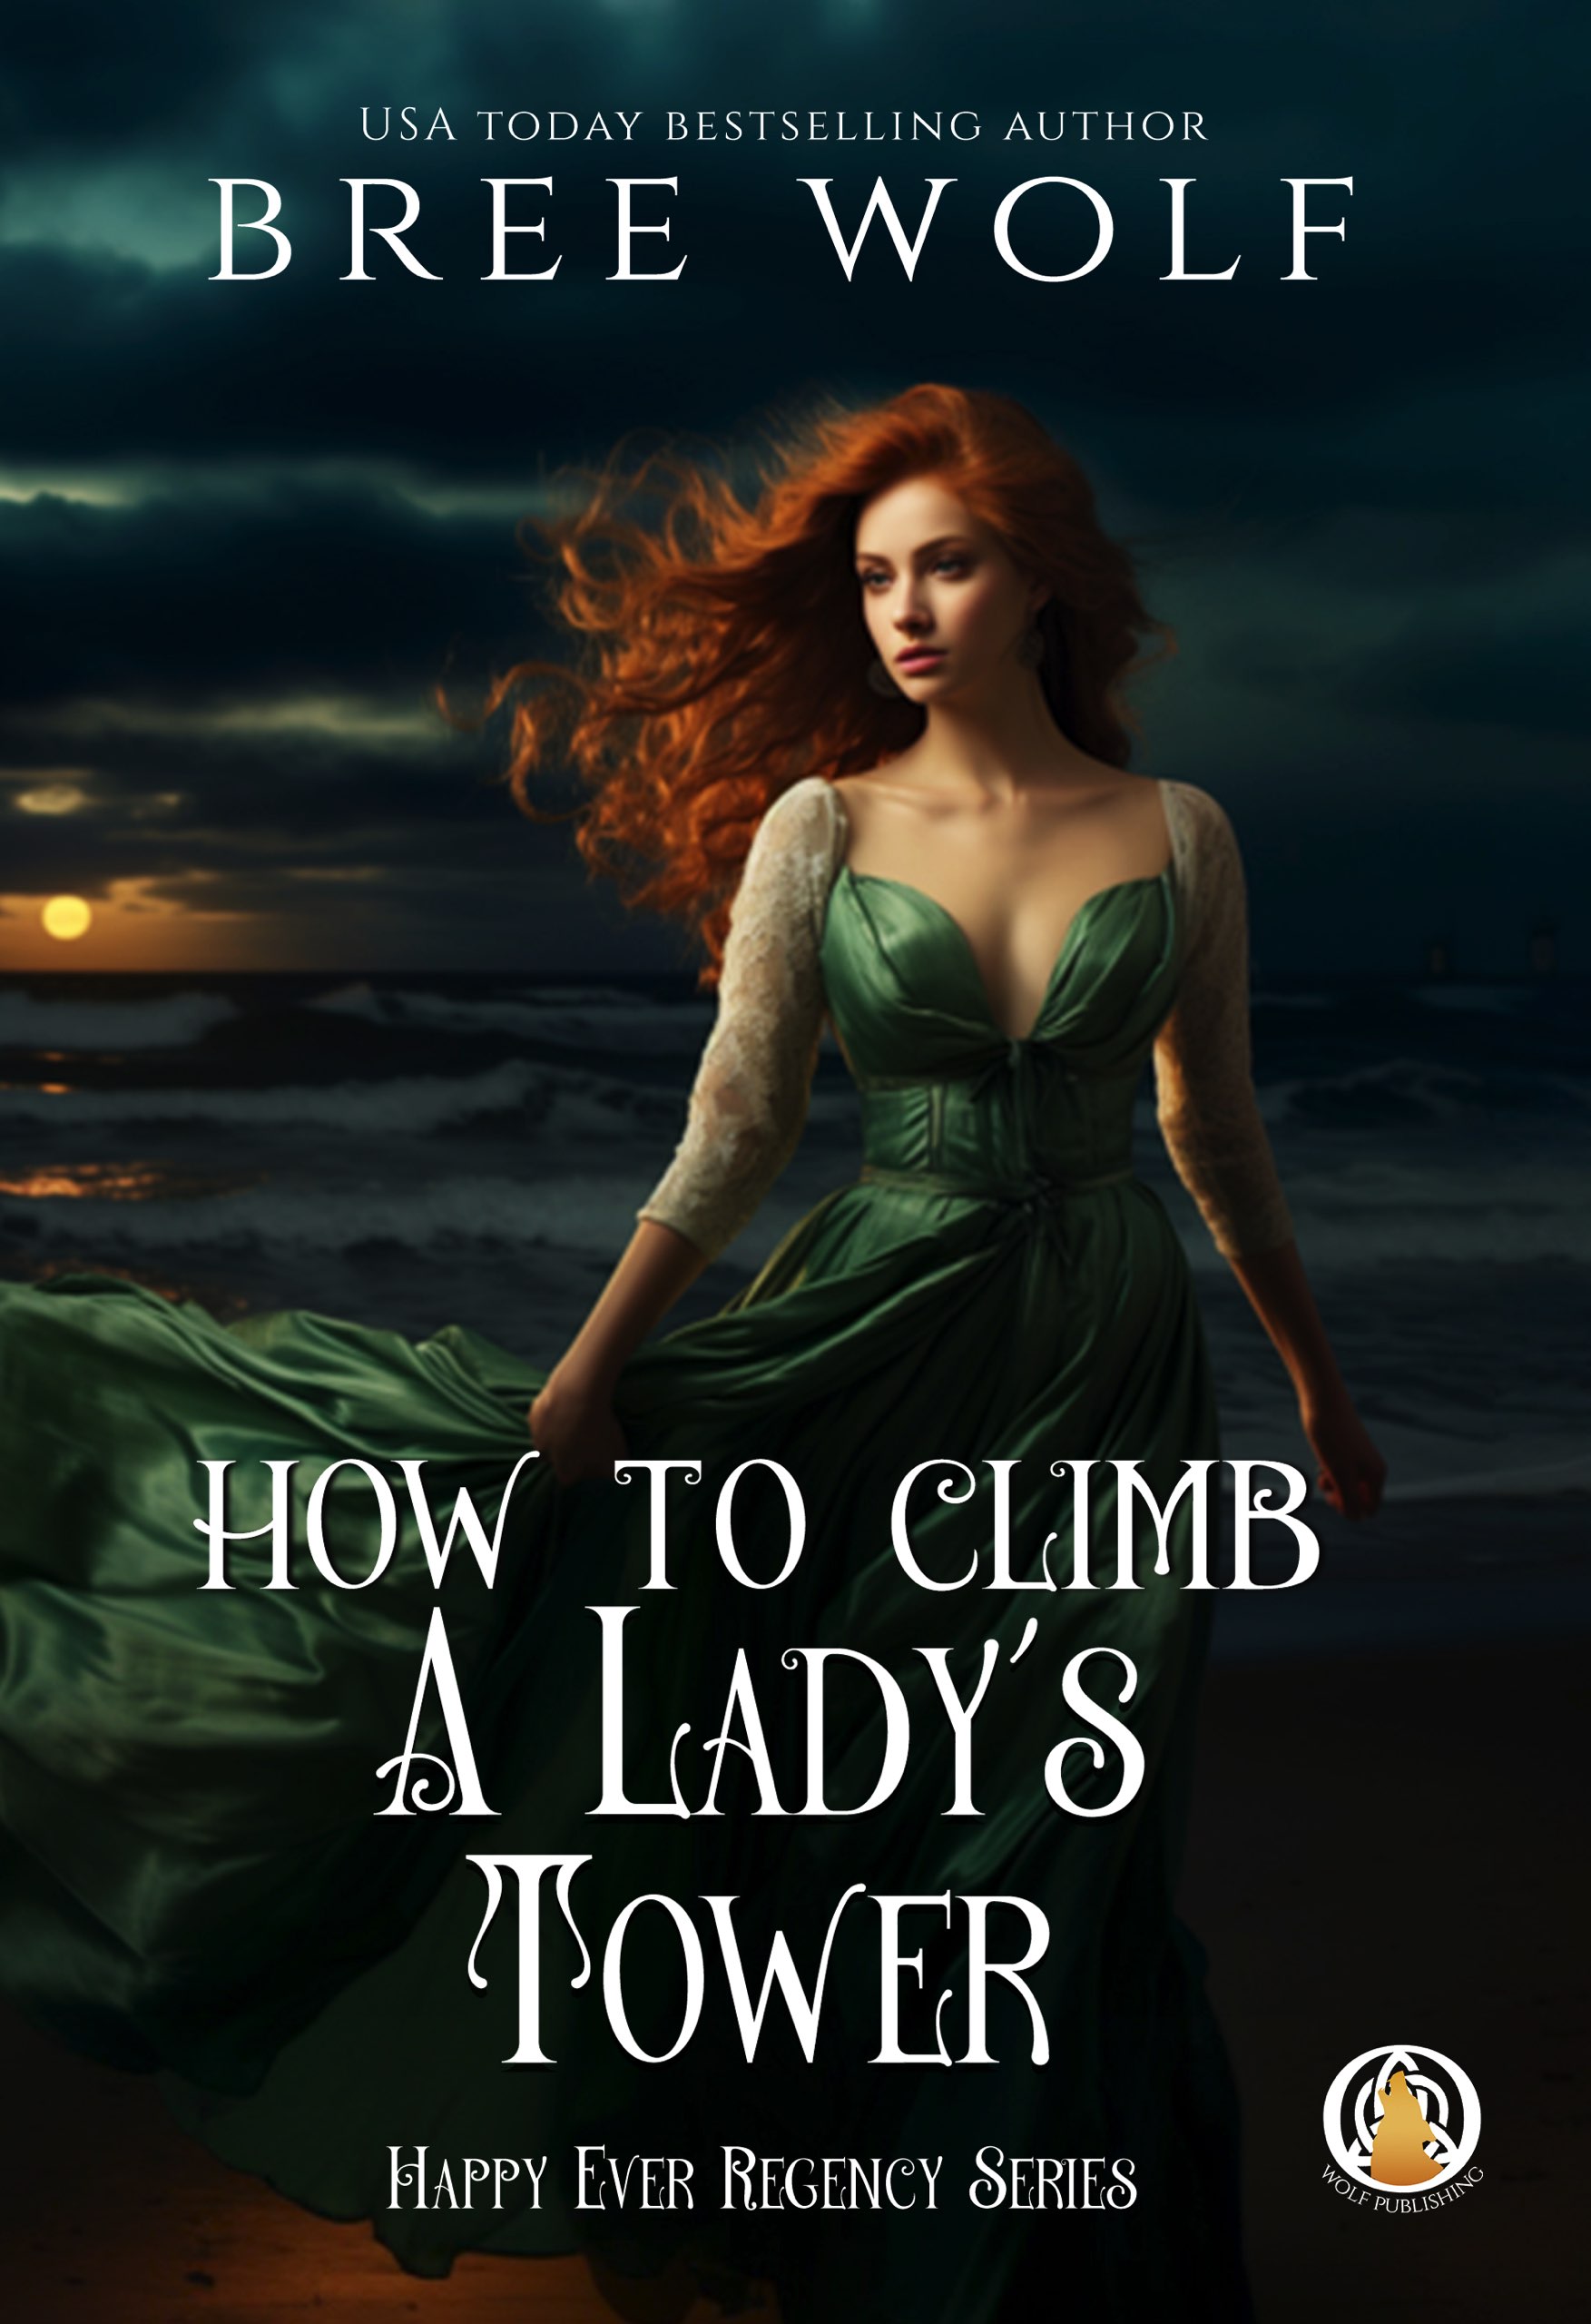 How-to-Climb-a-Ladys-Tower-Generic